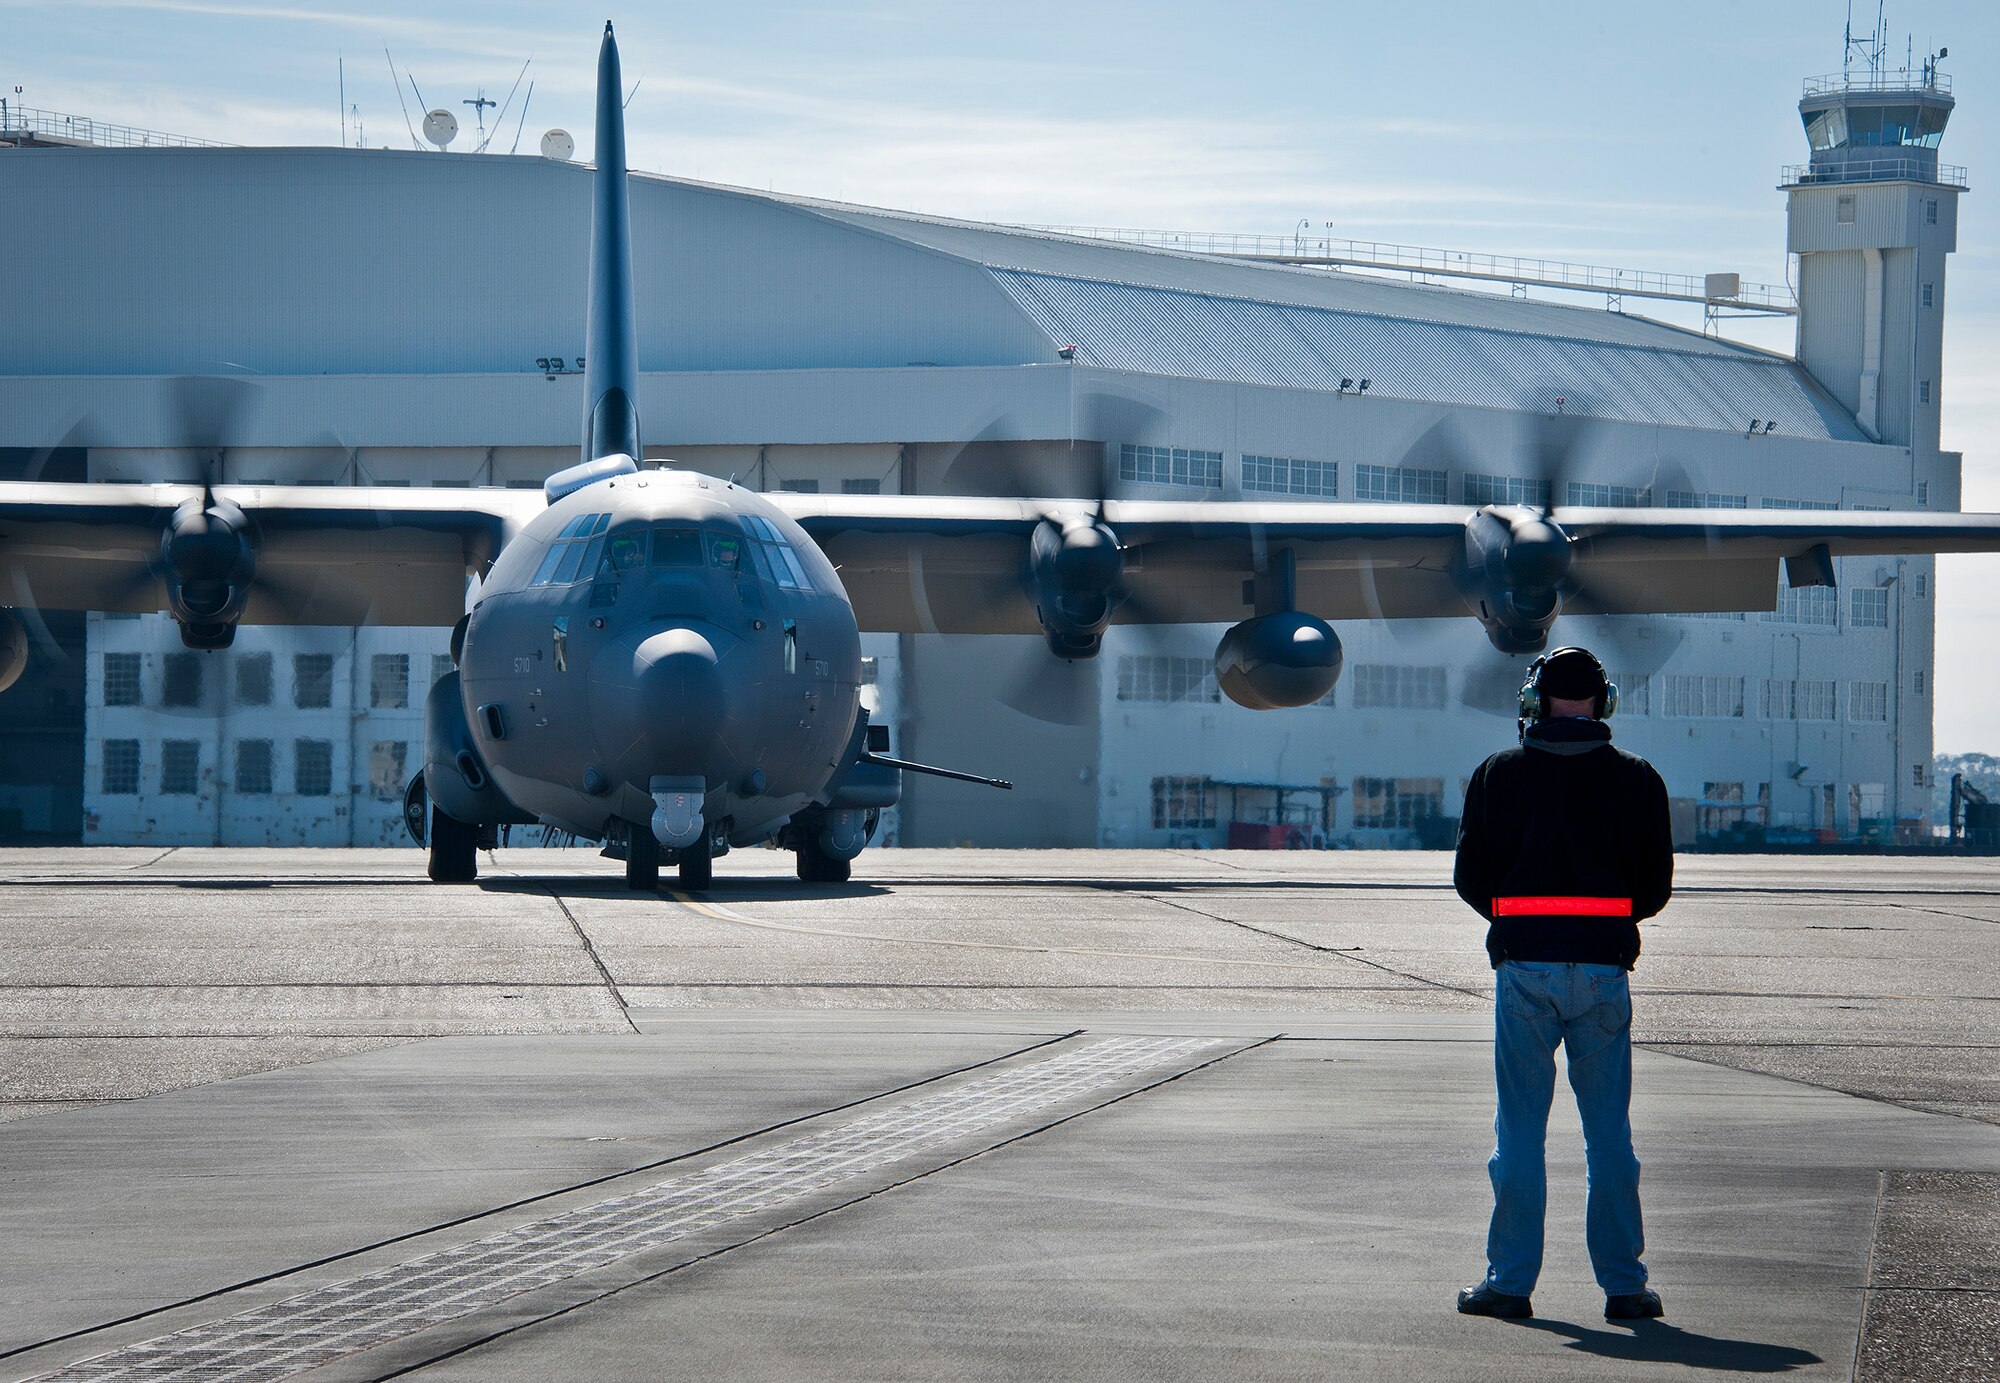 Dave King, of Lockheed Martin, prepares to marshal out the AC-130J Ghostrider for its first official sortie Jan. 31 at Eglin Air Force Base, Fla. The Air Force Special Operations Command MC-130J arrived at Eglin in January 2013 to begin the modification process for the AC-130J, whose primary mission is close air support, air interdiction and armed reconnaissance. A total of 32 MC-130J prototypes will be modified as part of a $2.4 billion AC-130J program to grow the future fleet. (U.S. Air Force photo/Chrissy Cuttita)